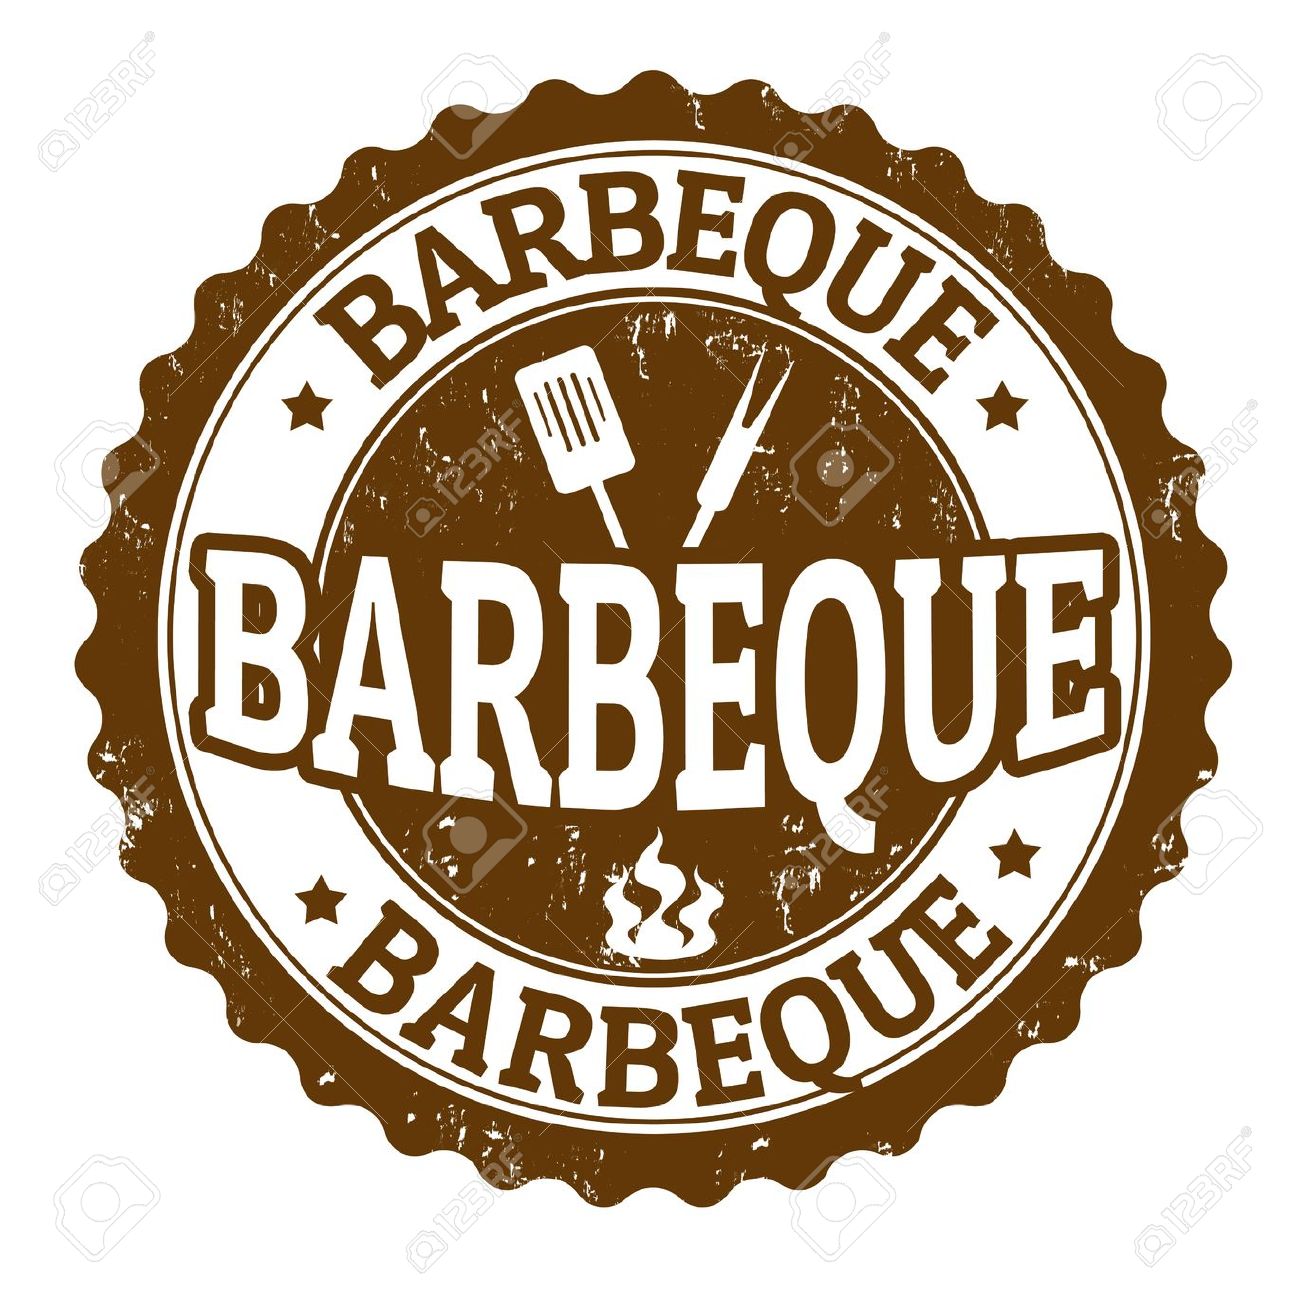 Family bbq clipart free image 4 – Gclipart 